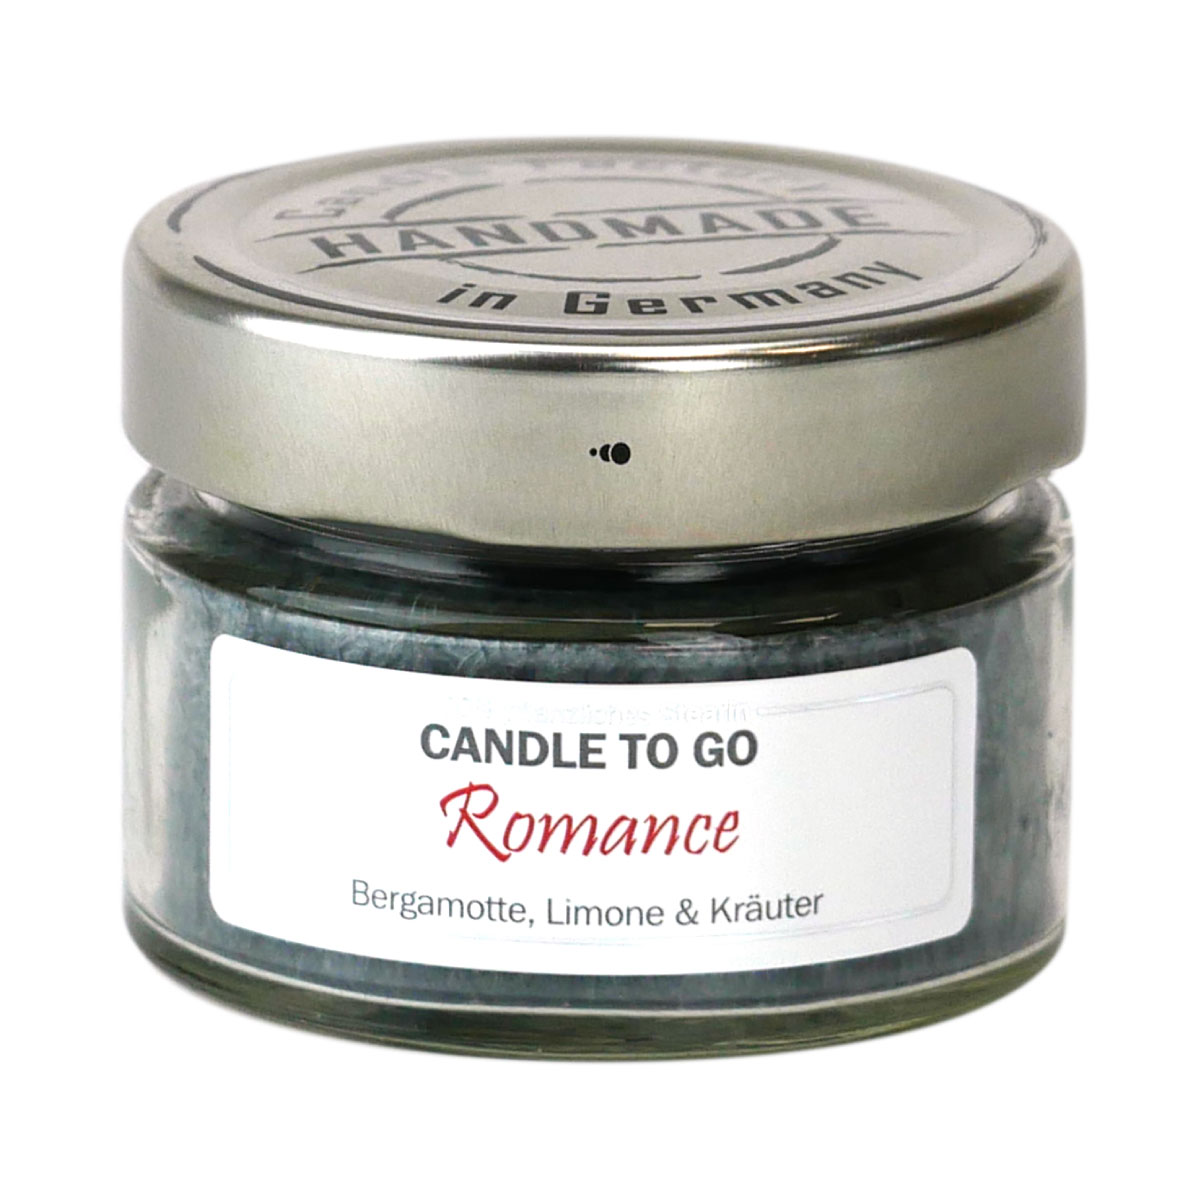 Romance - Candle to Go Duftkerze von Candle Factory